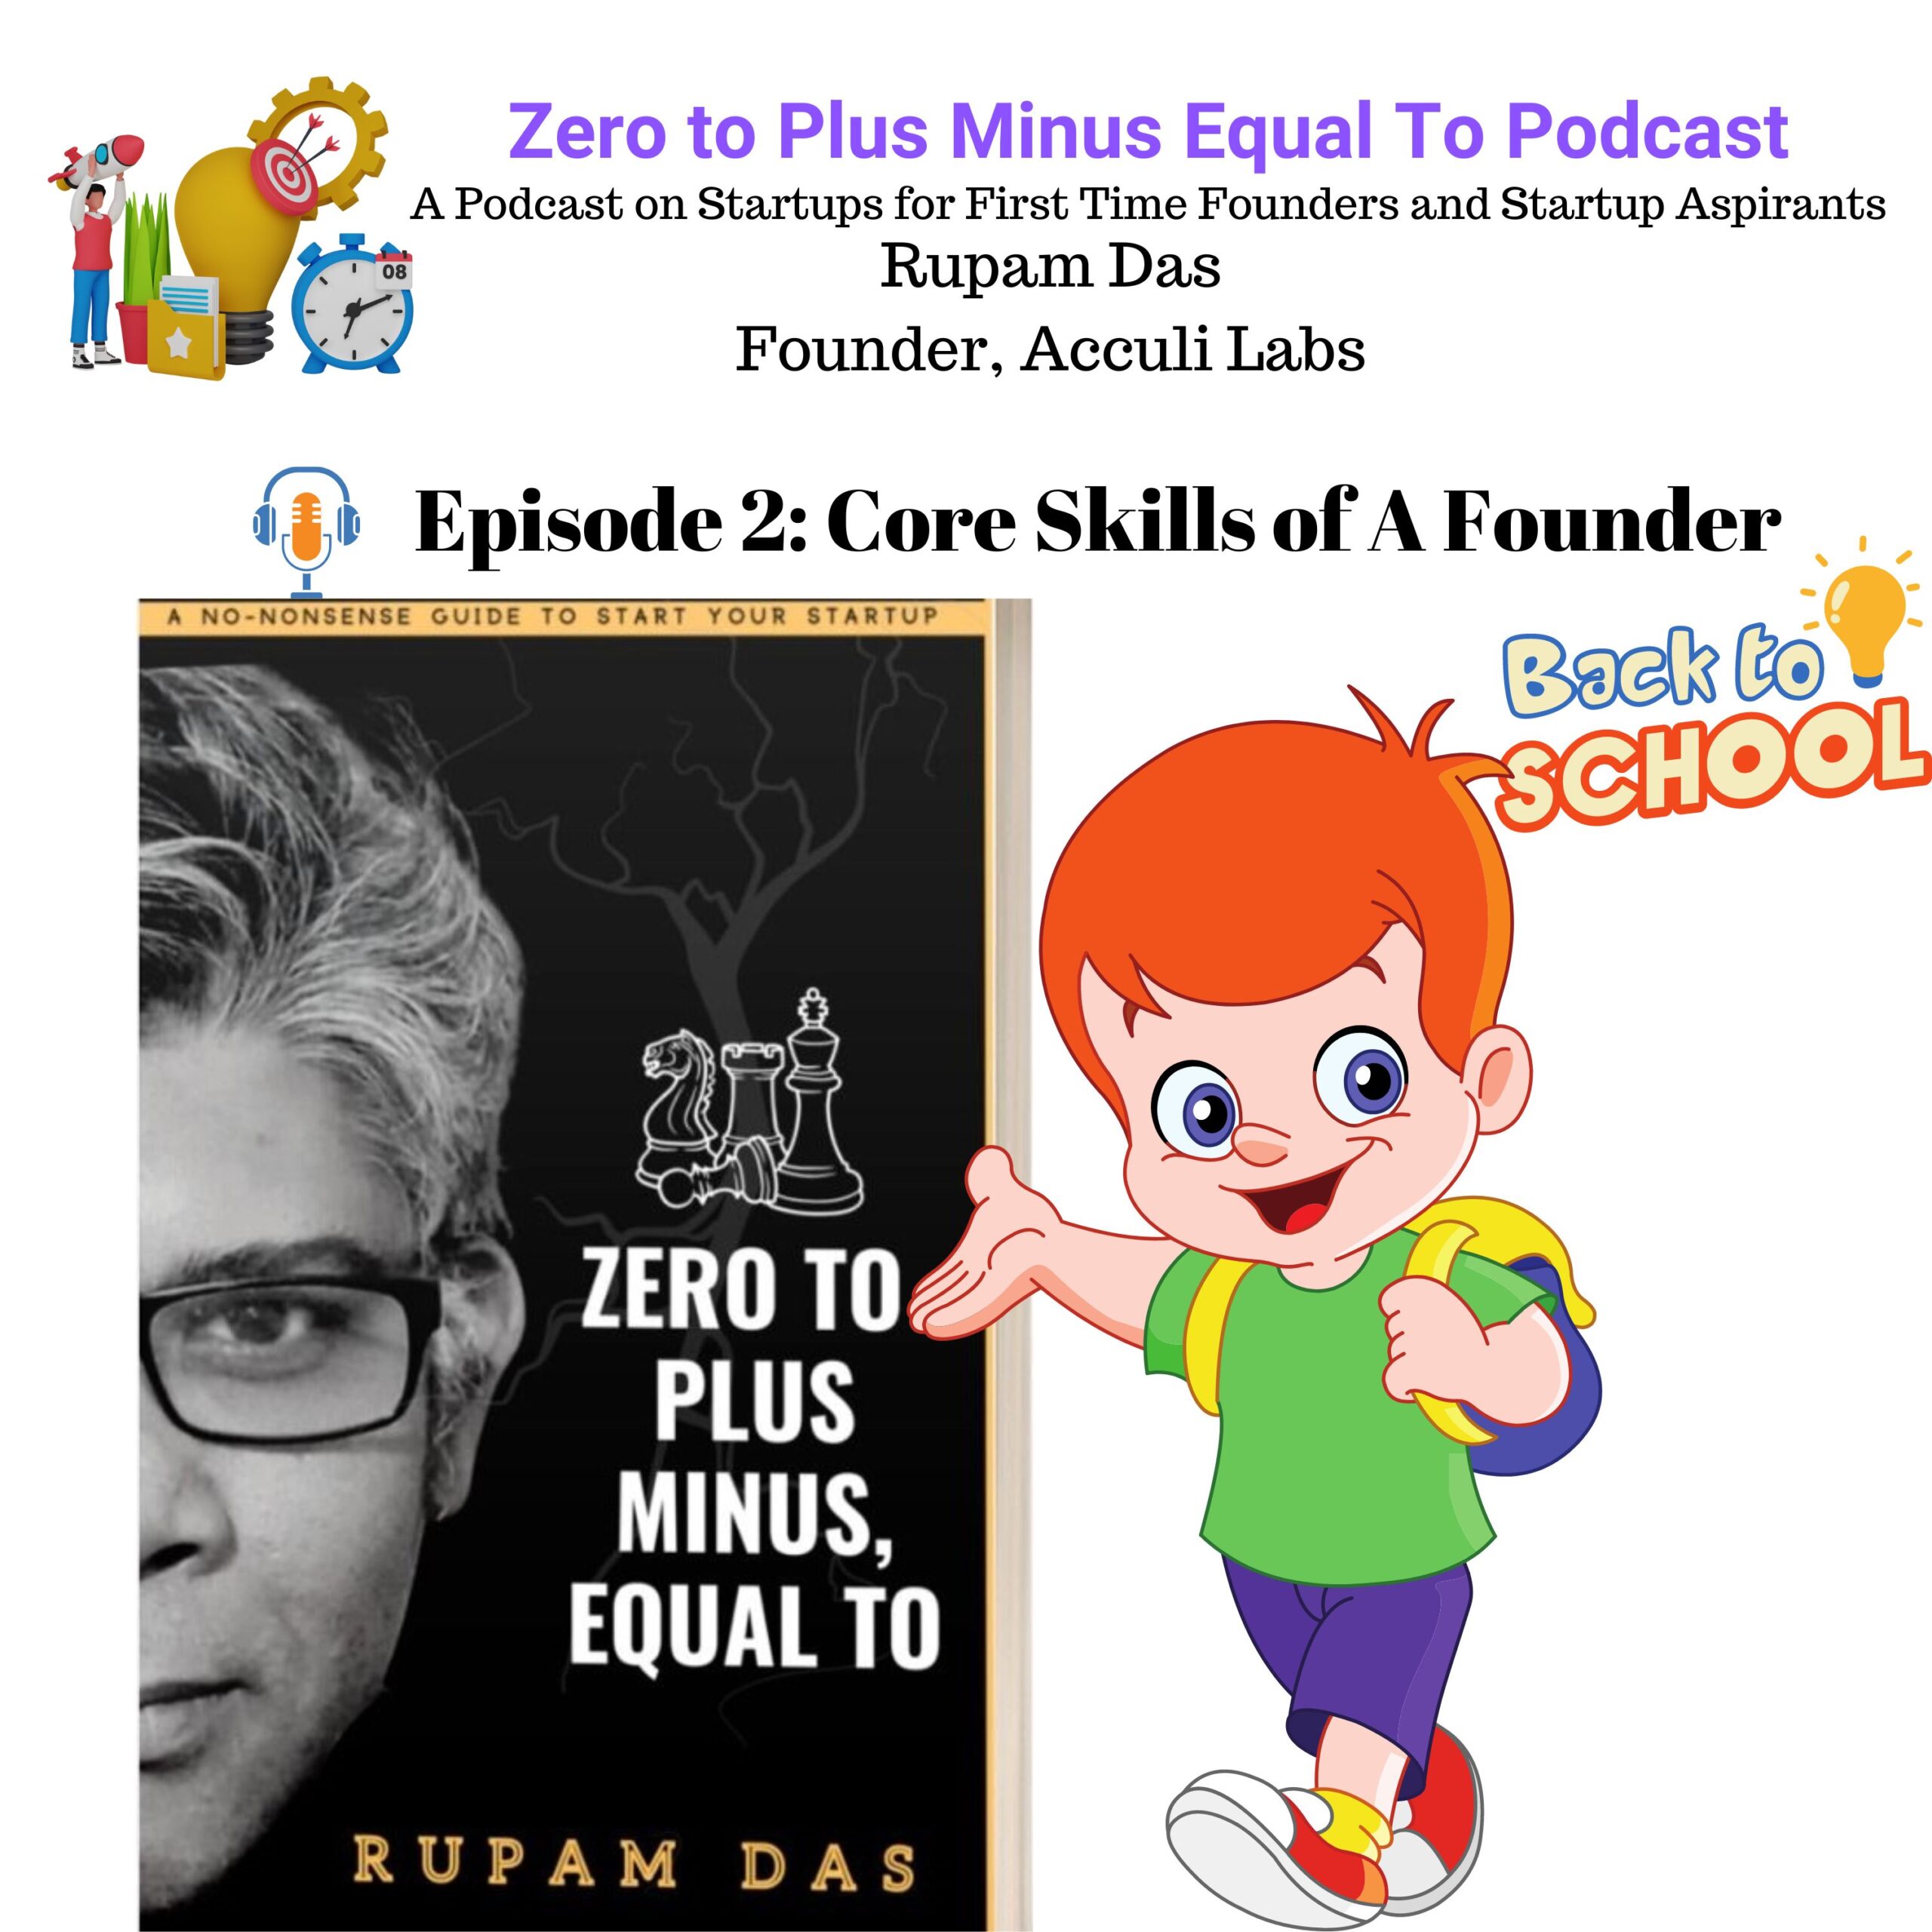 Zero to Plus Minus Equal To Podcast Episode 2-Core Skills of A Founder